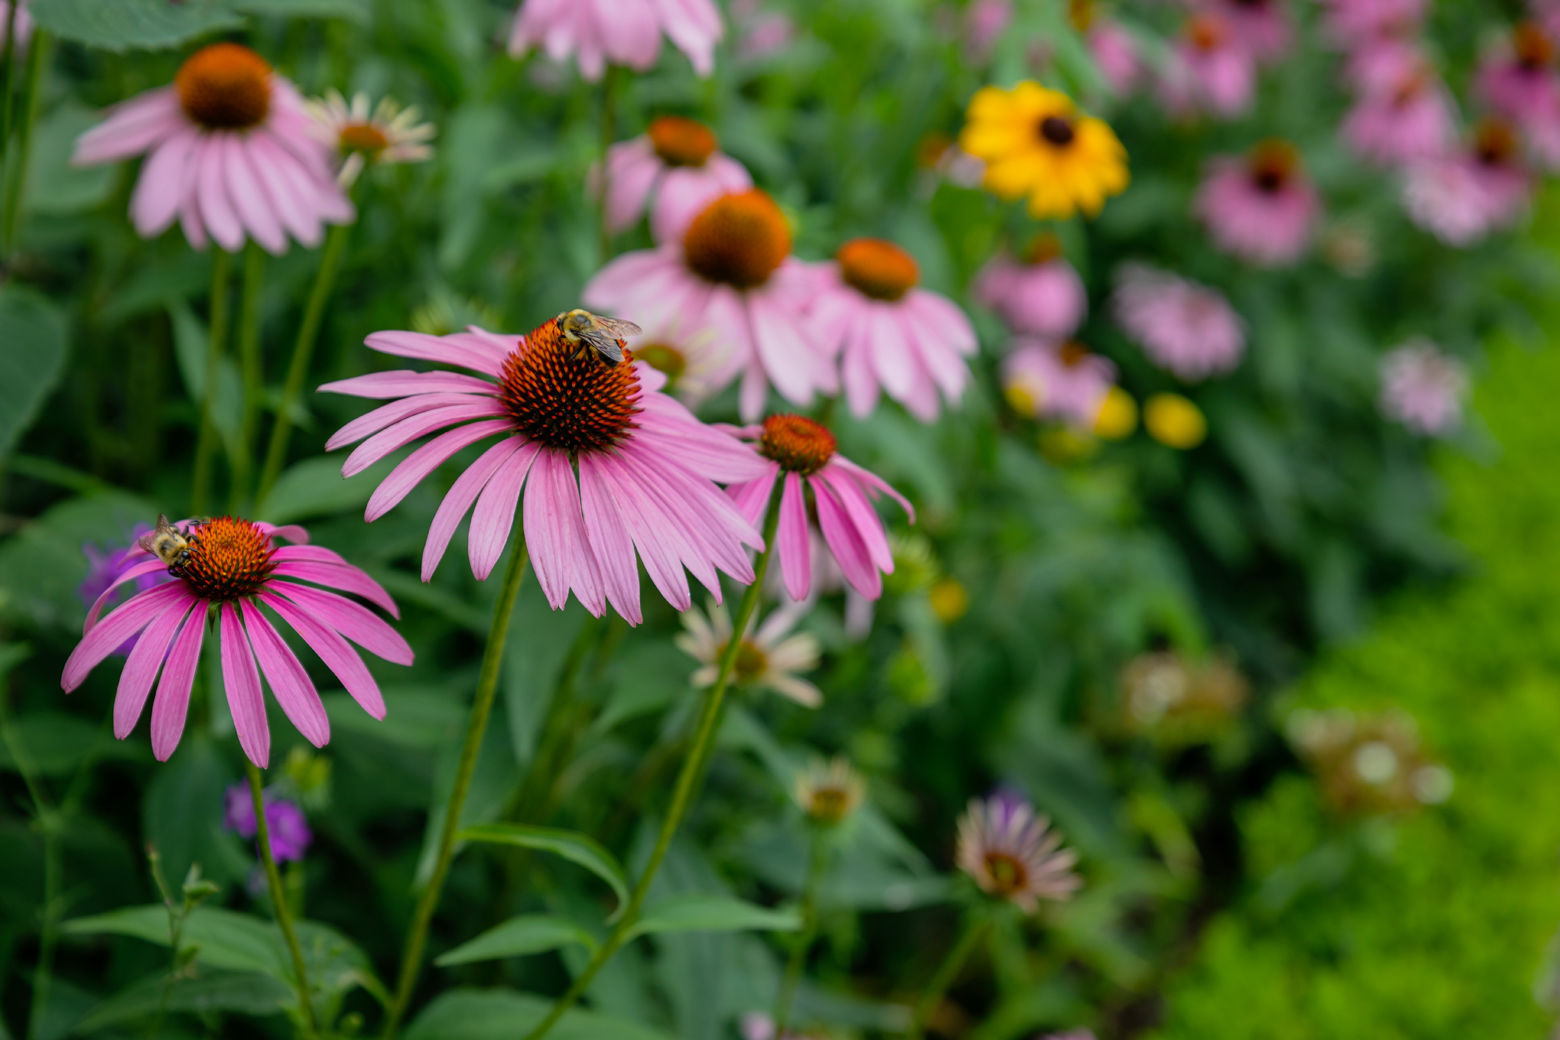 Pollinators, like bees and other insects, play a crucial role in agriculture and the natural beauty of the Washington, D.C. area. (Courtesy Accor Hotels)